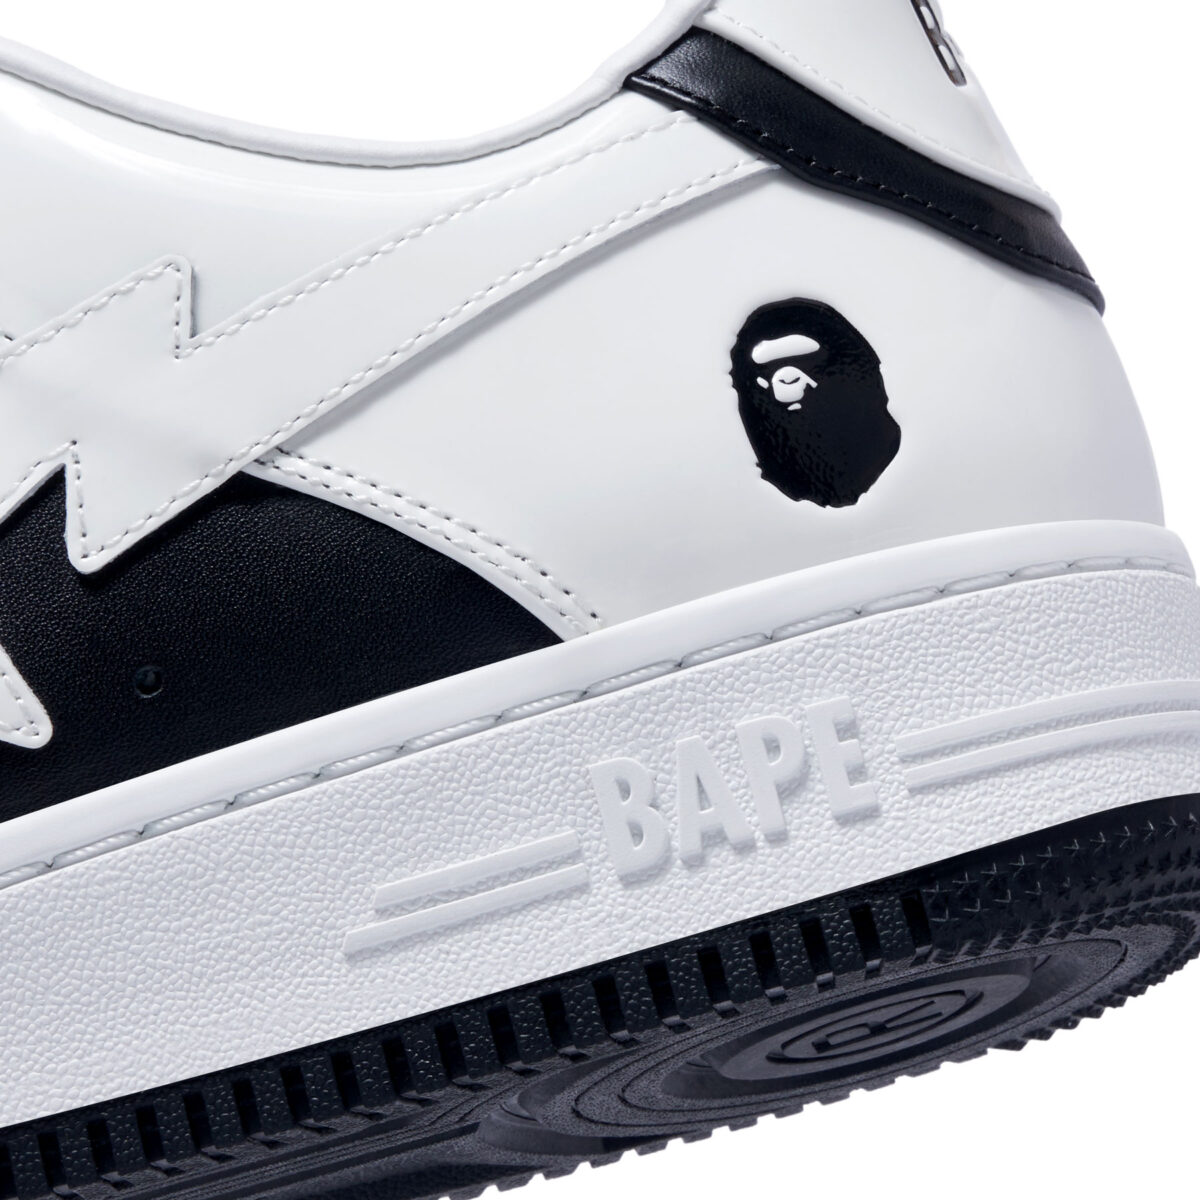 BAPE STA "Patent Leather" Collection